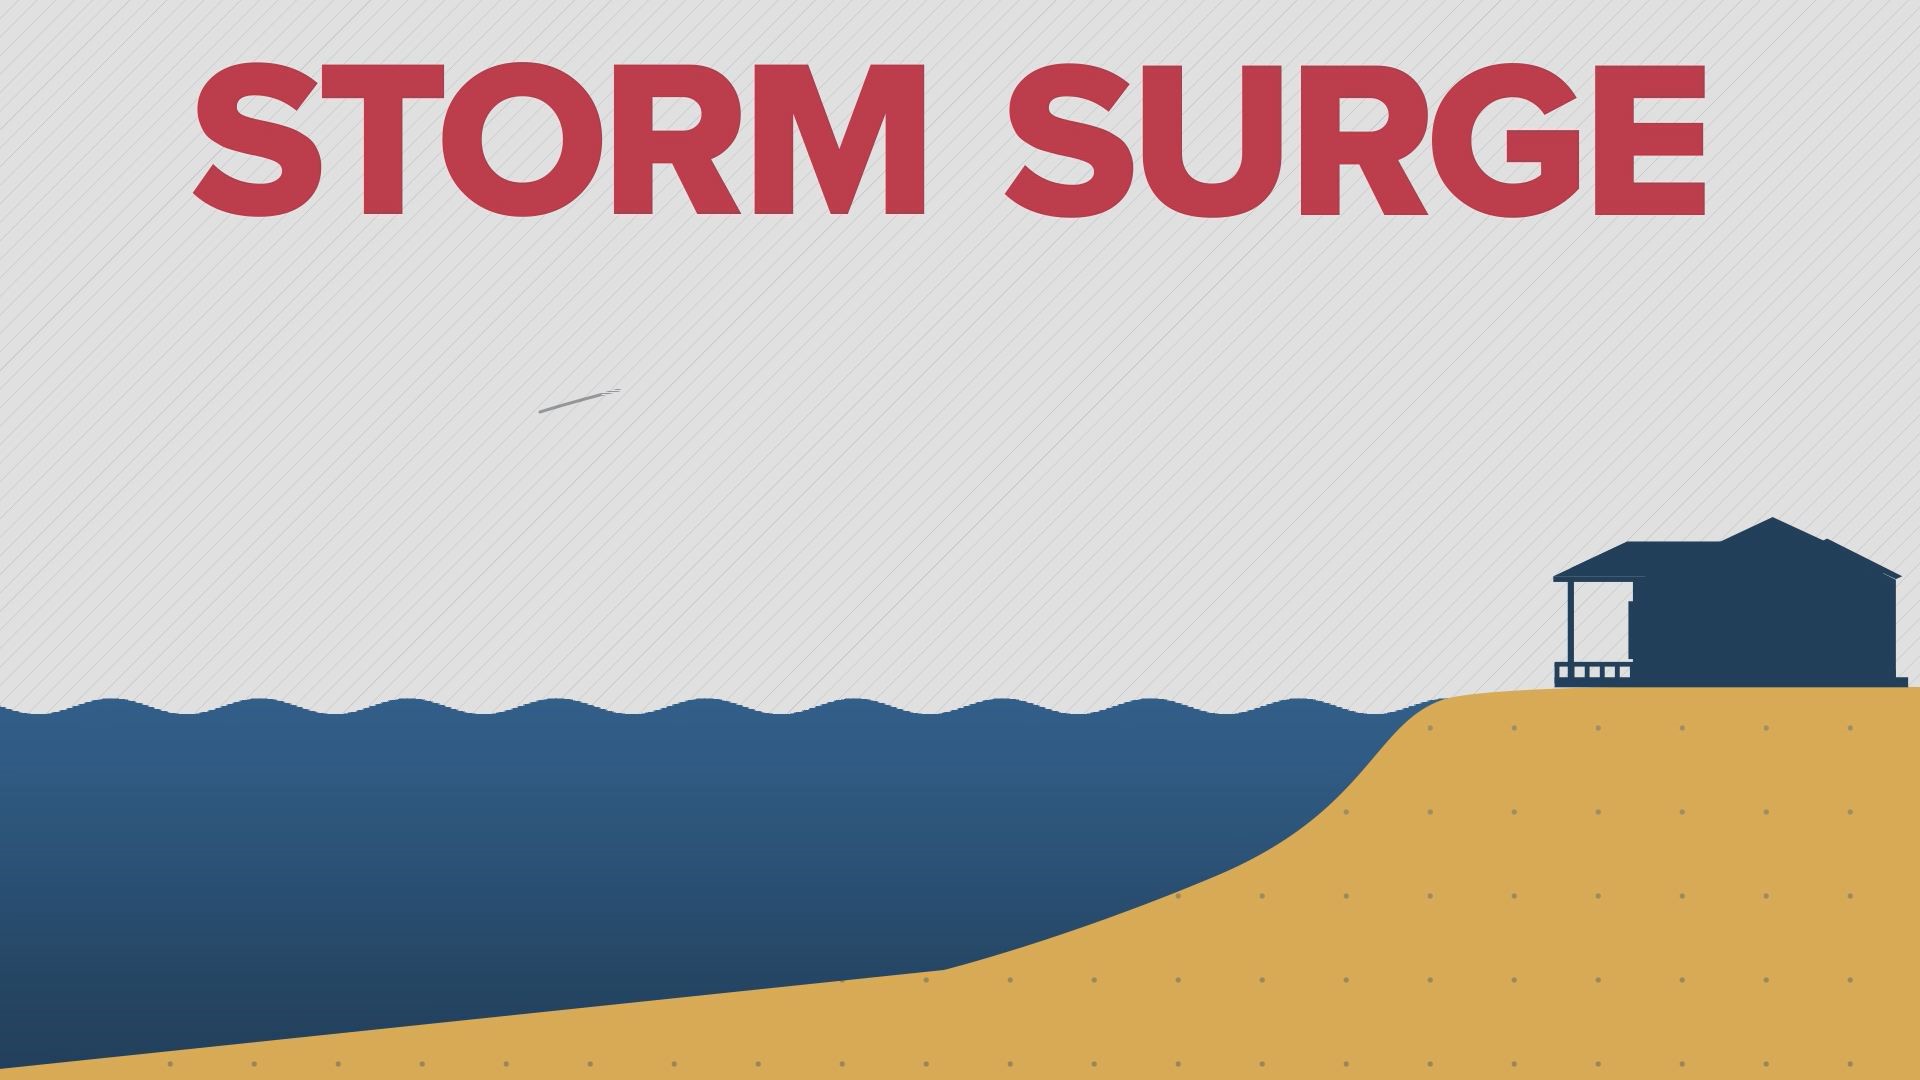 Storm surge happens when the strong winds of the hurricane blow over the ocean or gulf water, literally forcing the water to pile up as it approaches the coast.